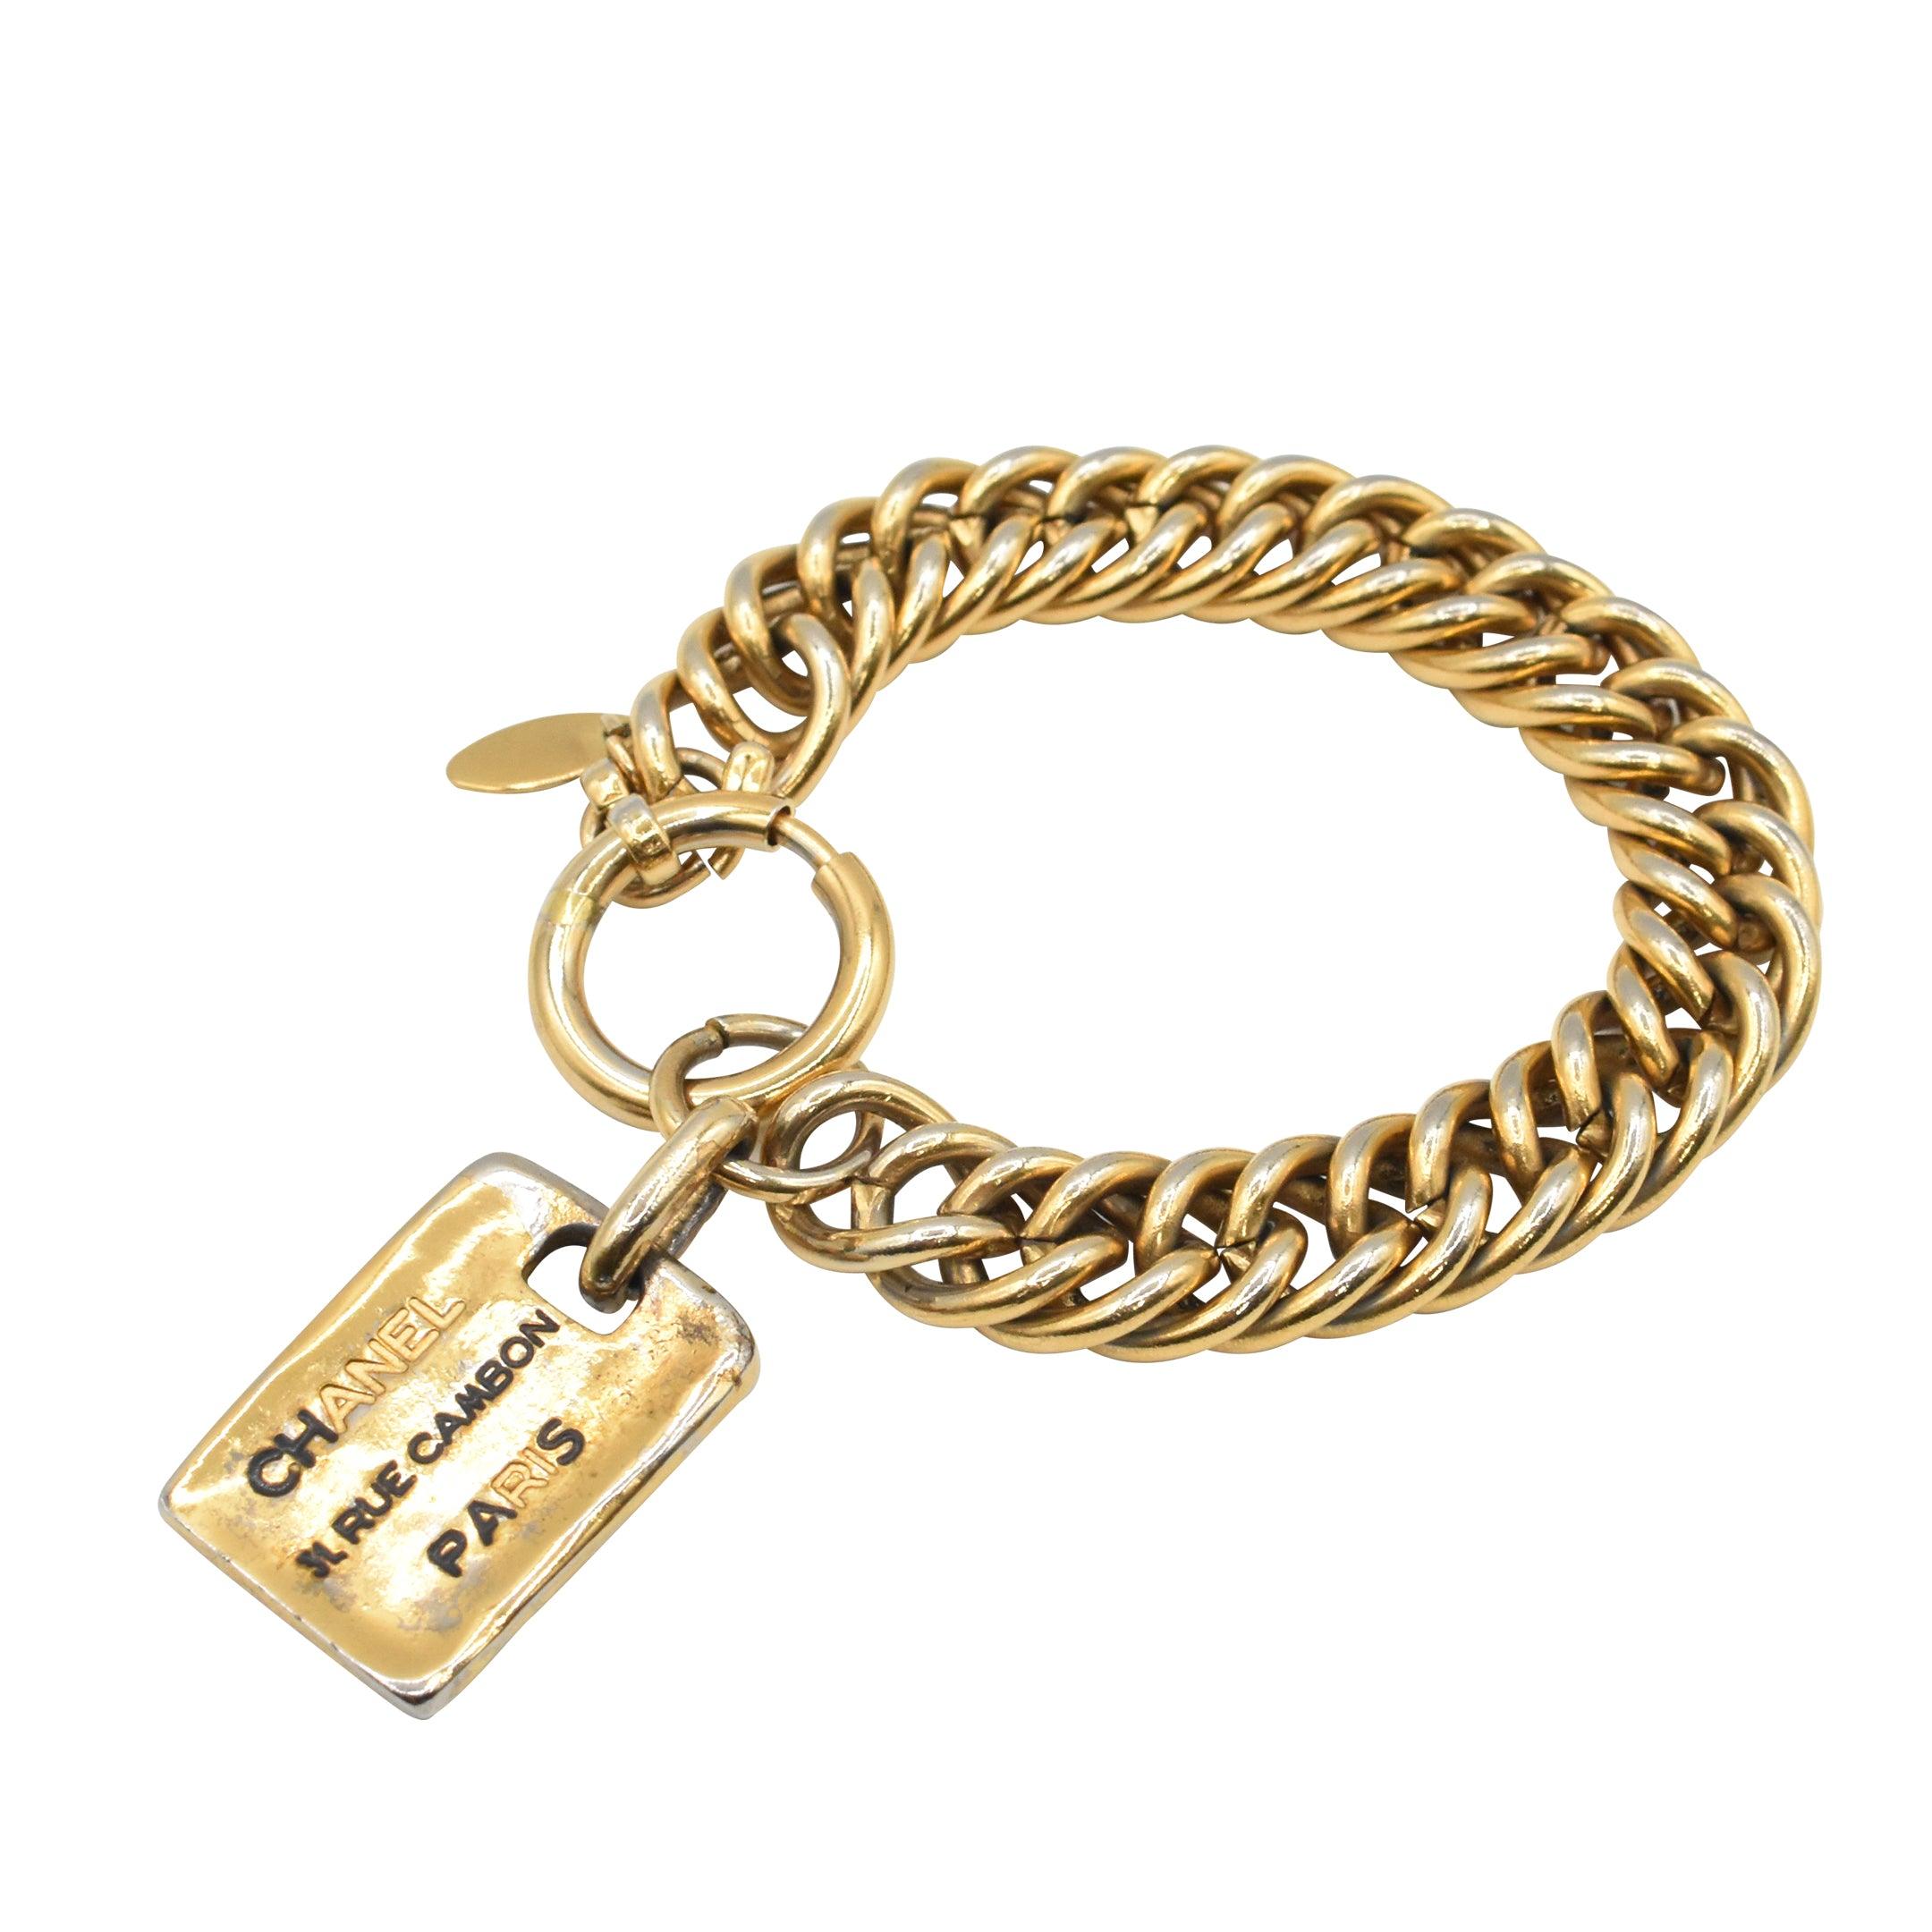 Chanel '31 Rue Cambon' Bracelet - Fashionably Yours